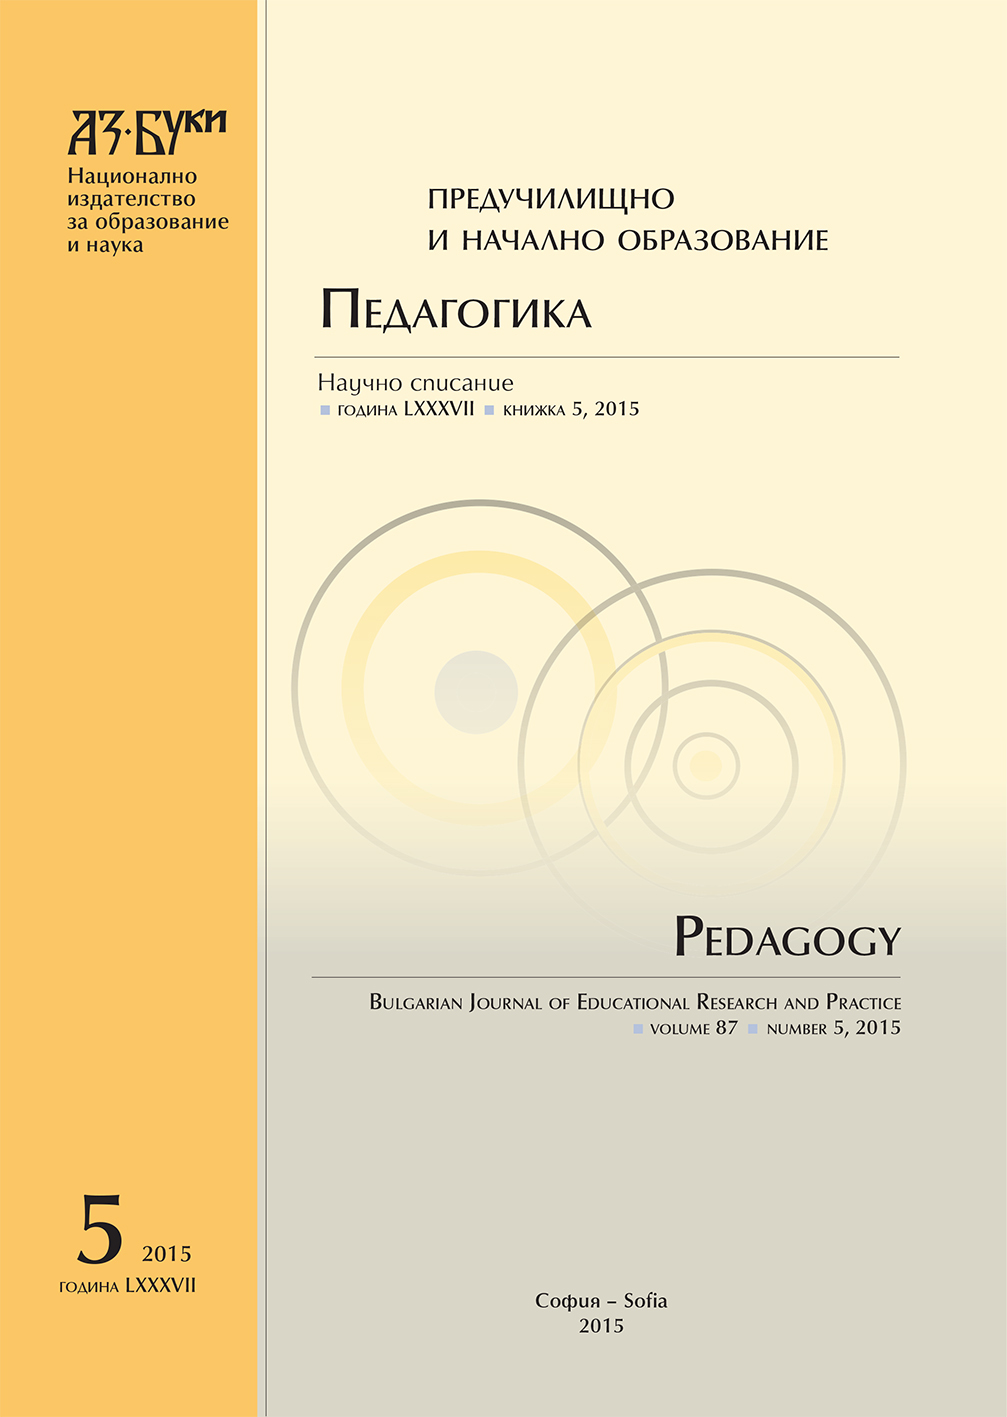 The National Assessment in Bulgarian Language and Literature in 4th Grade Cover Image